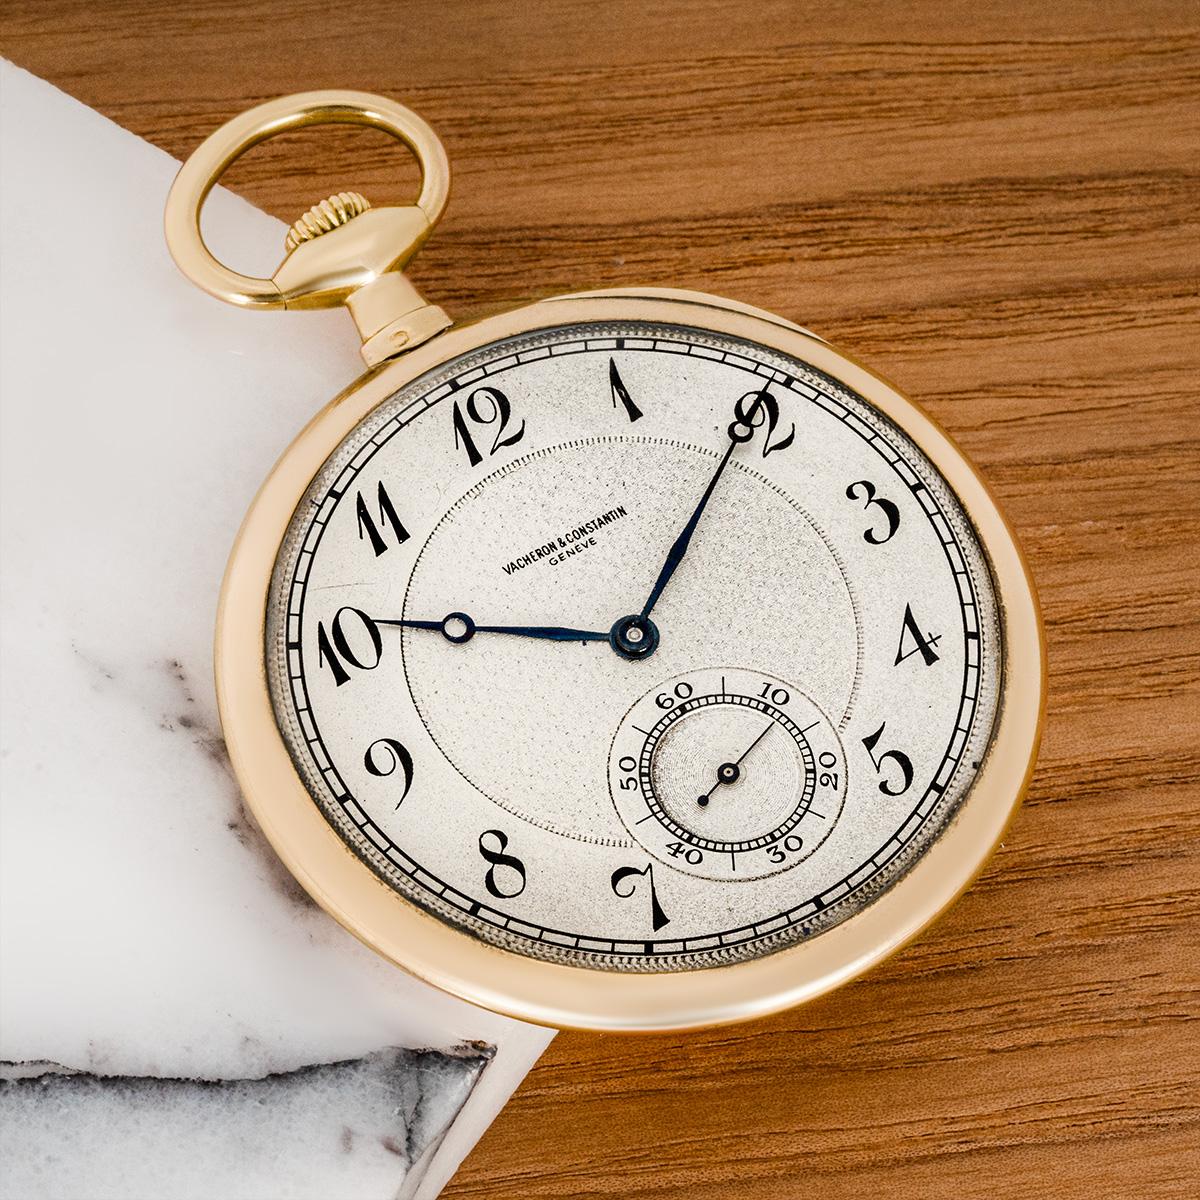 Vacheron & Constantin. An 18ct Yellow Gold Slim Keyless lever Open Face Pocket Watch C1920

Dial: The beautiful Silver dial signed Vacheron & Constantin Geneve with engine turned centre with Breguet style numerals outer minute track and subsidiary